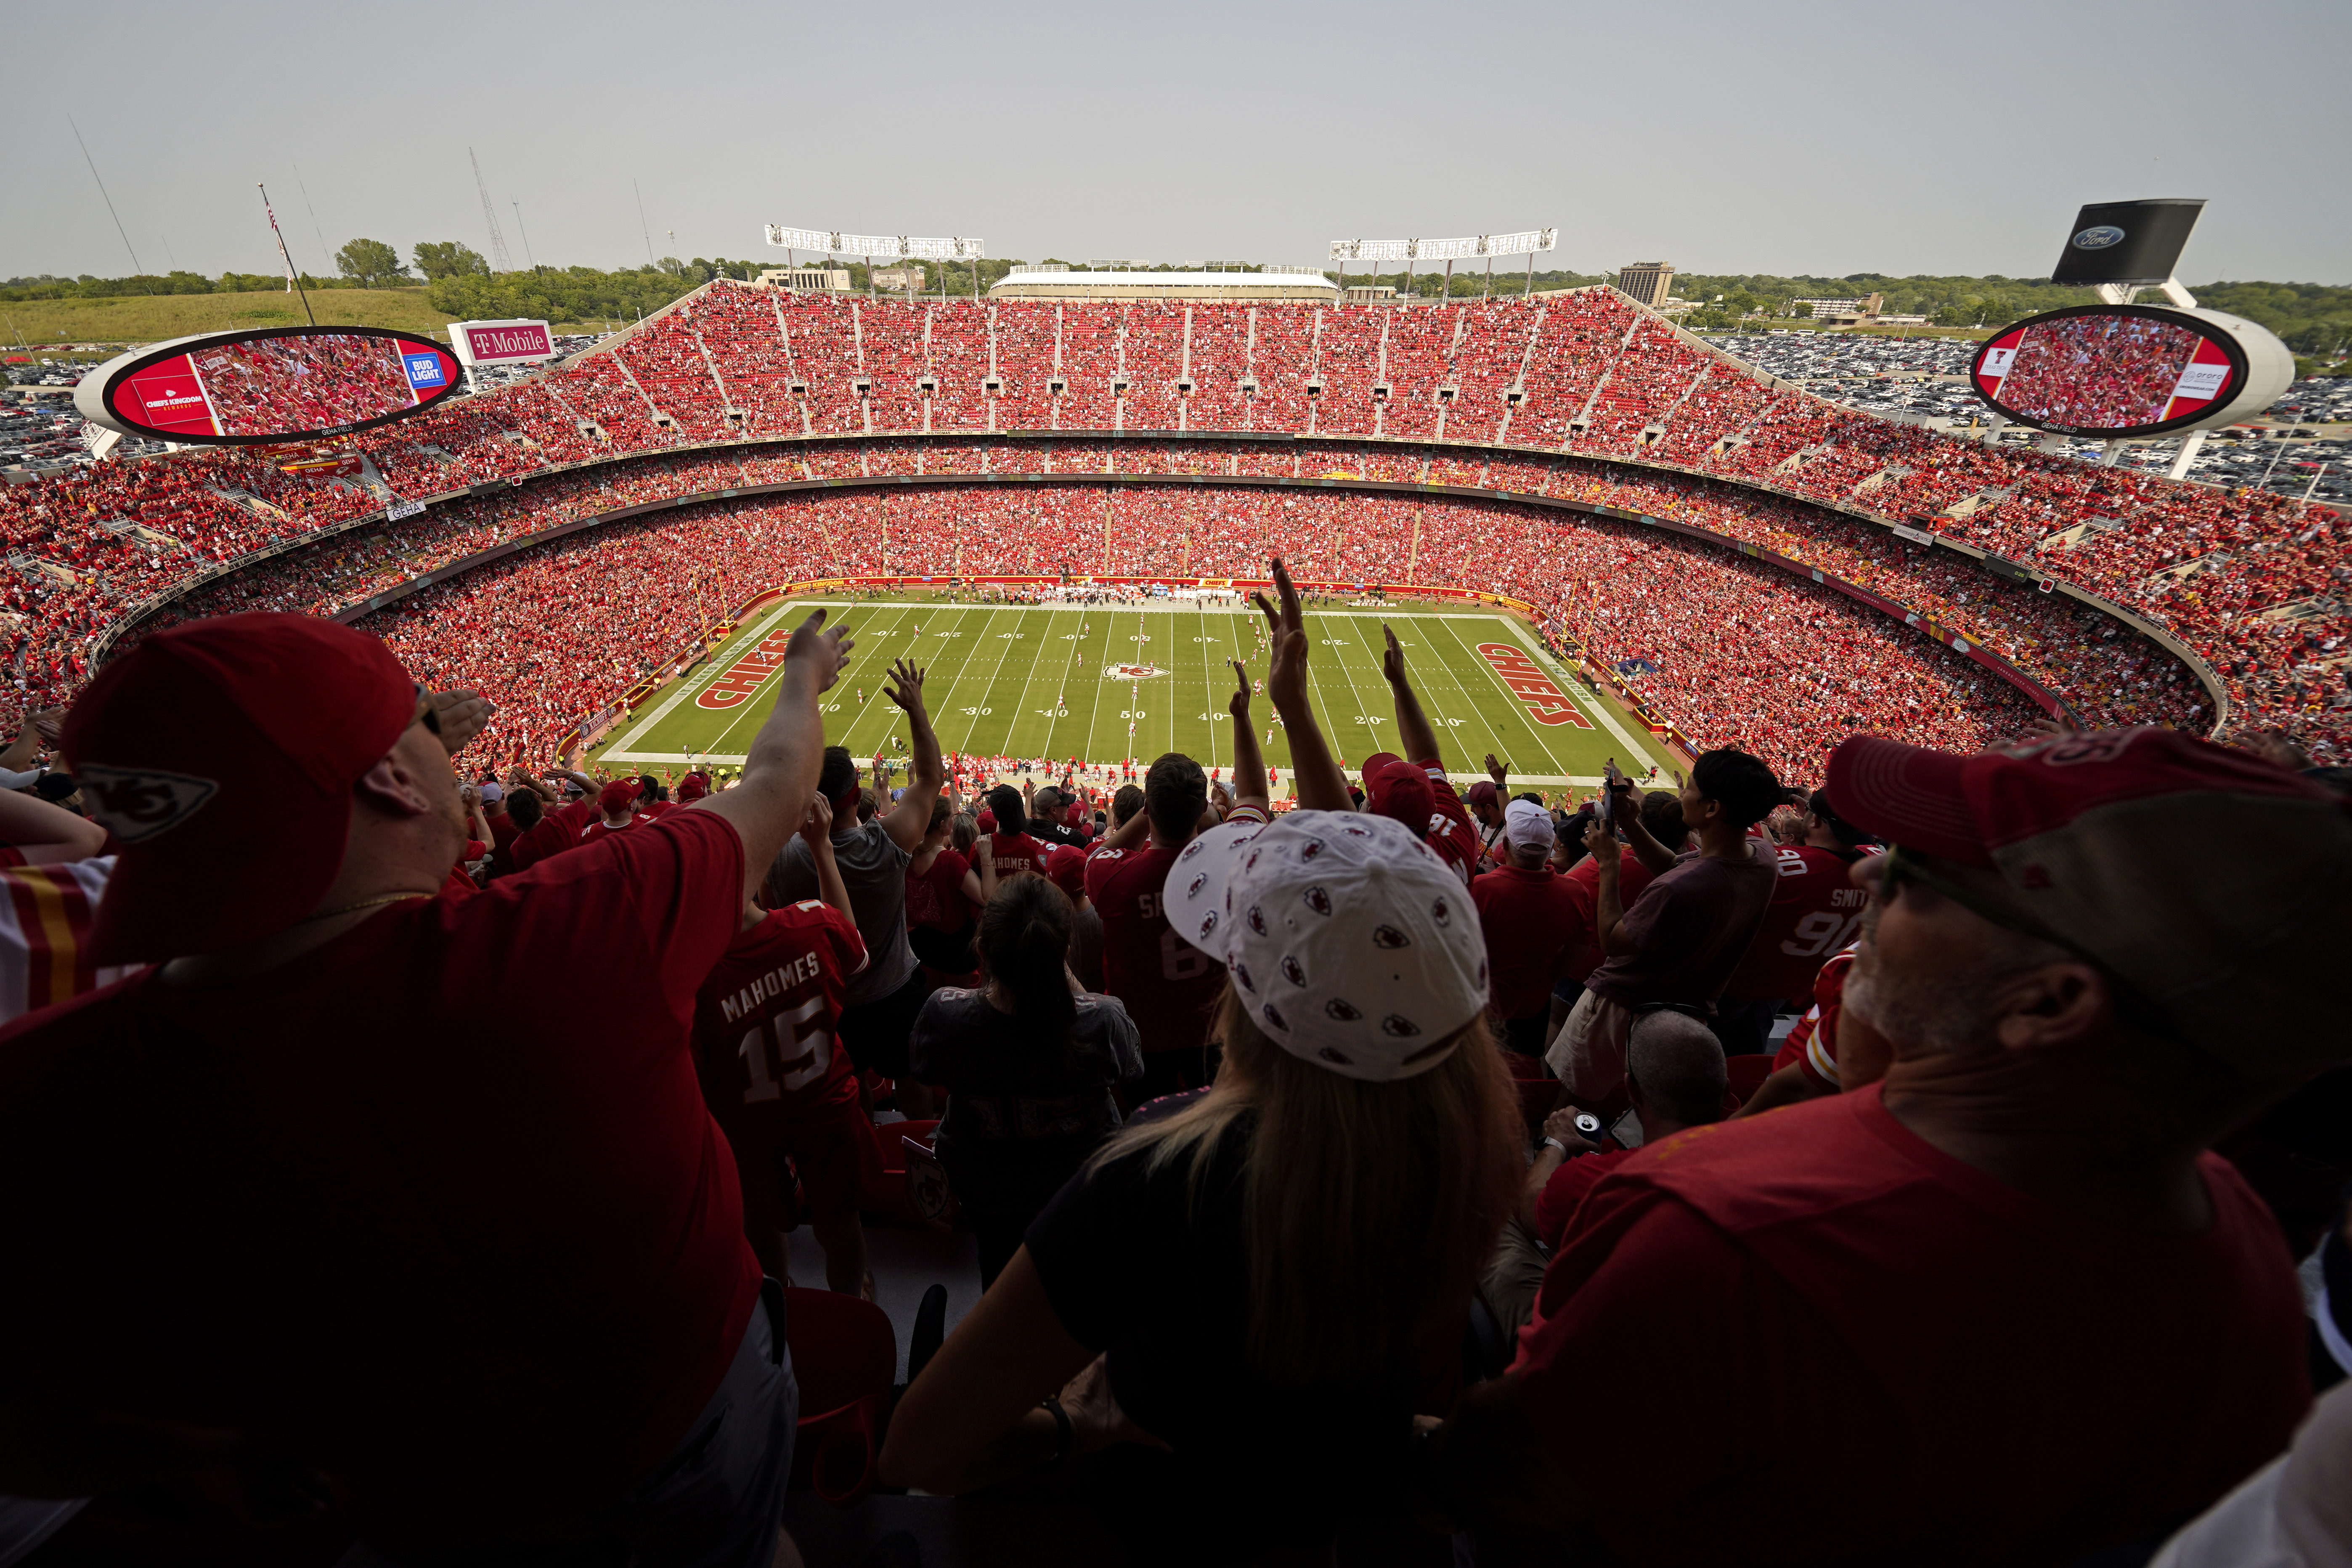 Bengals Road Trip! Bus ride offered to Arrowhead Stadium